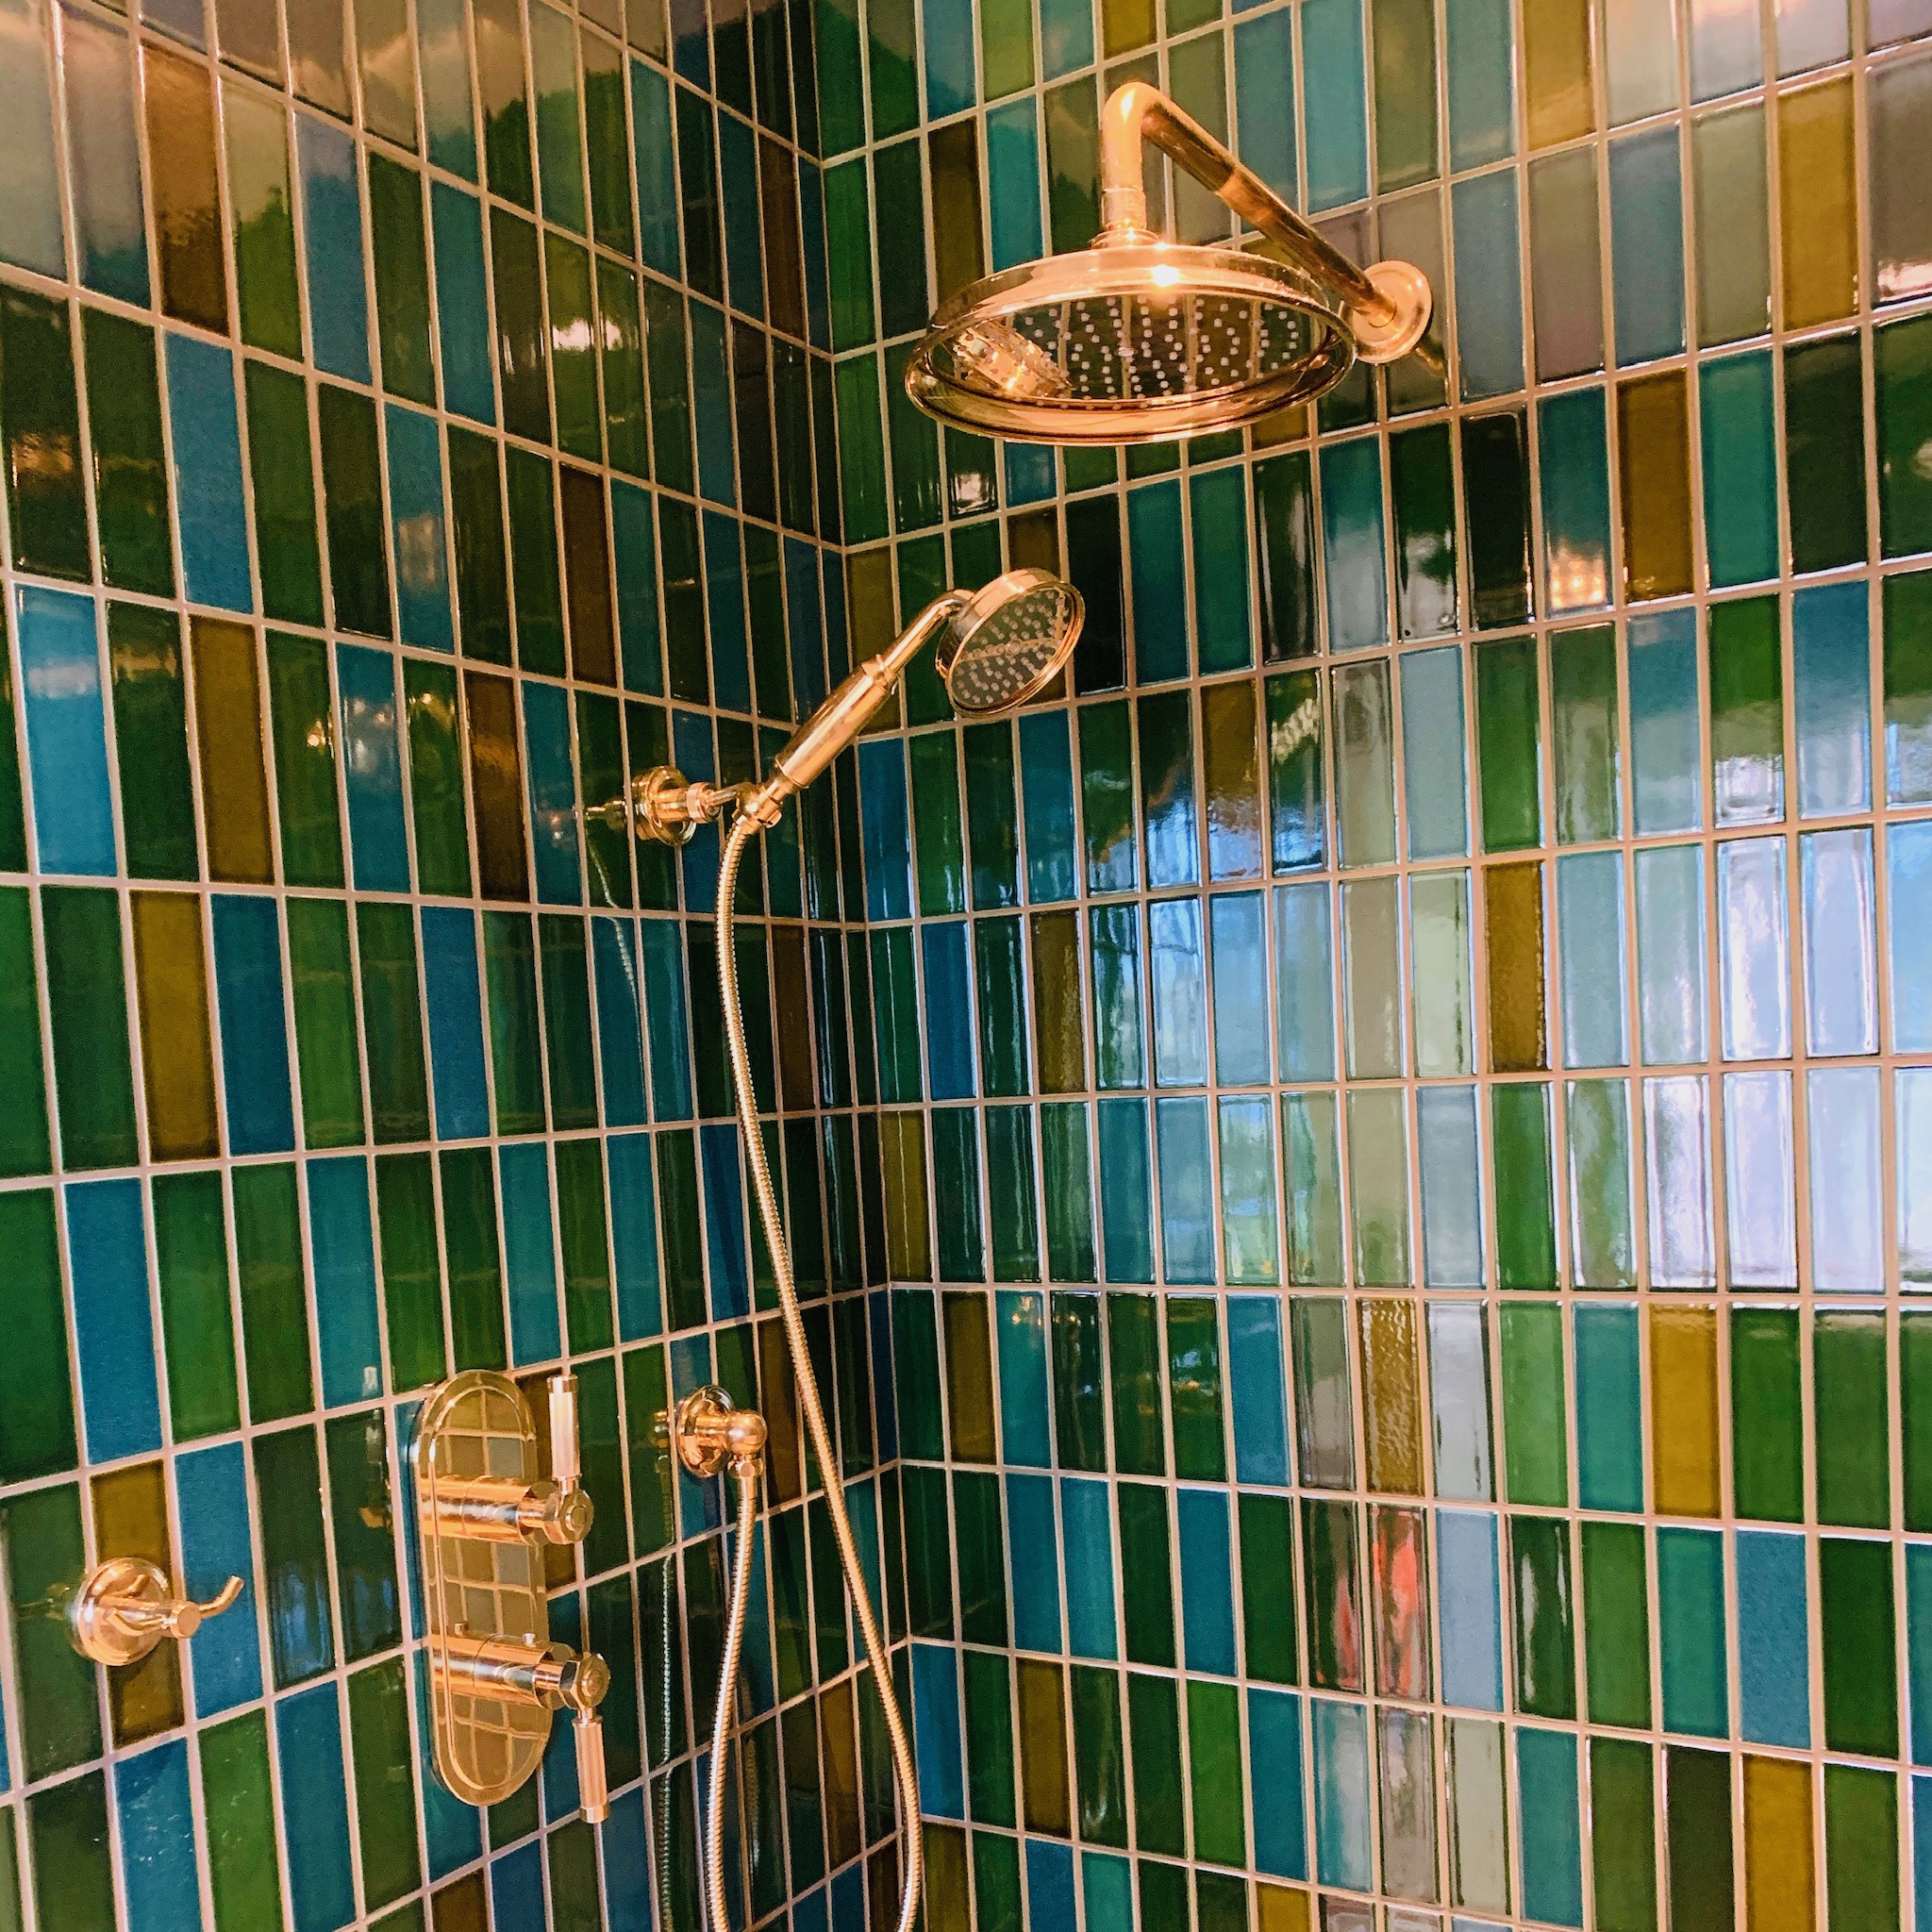 Gorgeous Shower With Shades of Green and Blue Tile | San Luis Obispo, CA